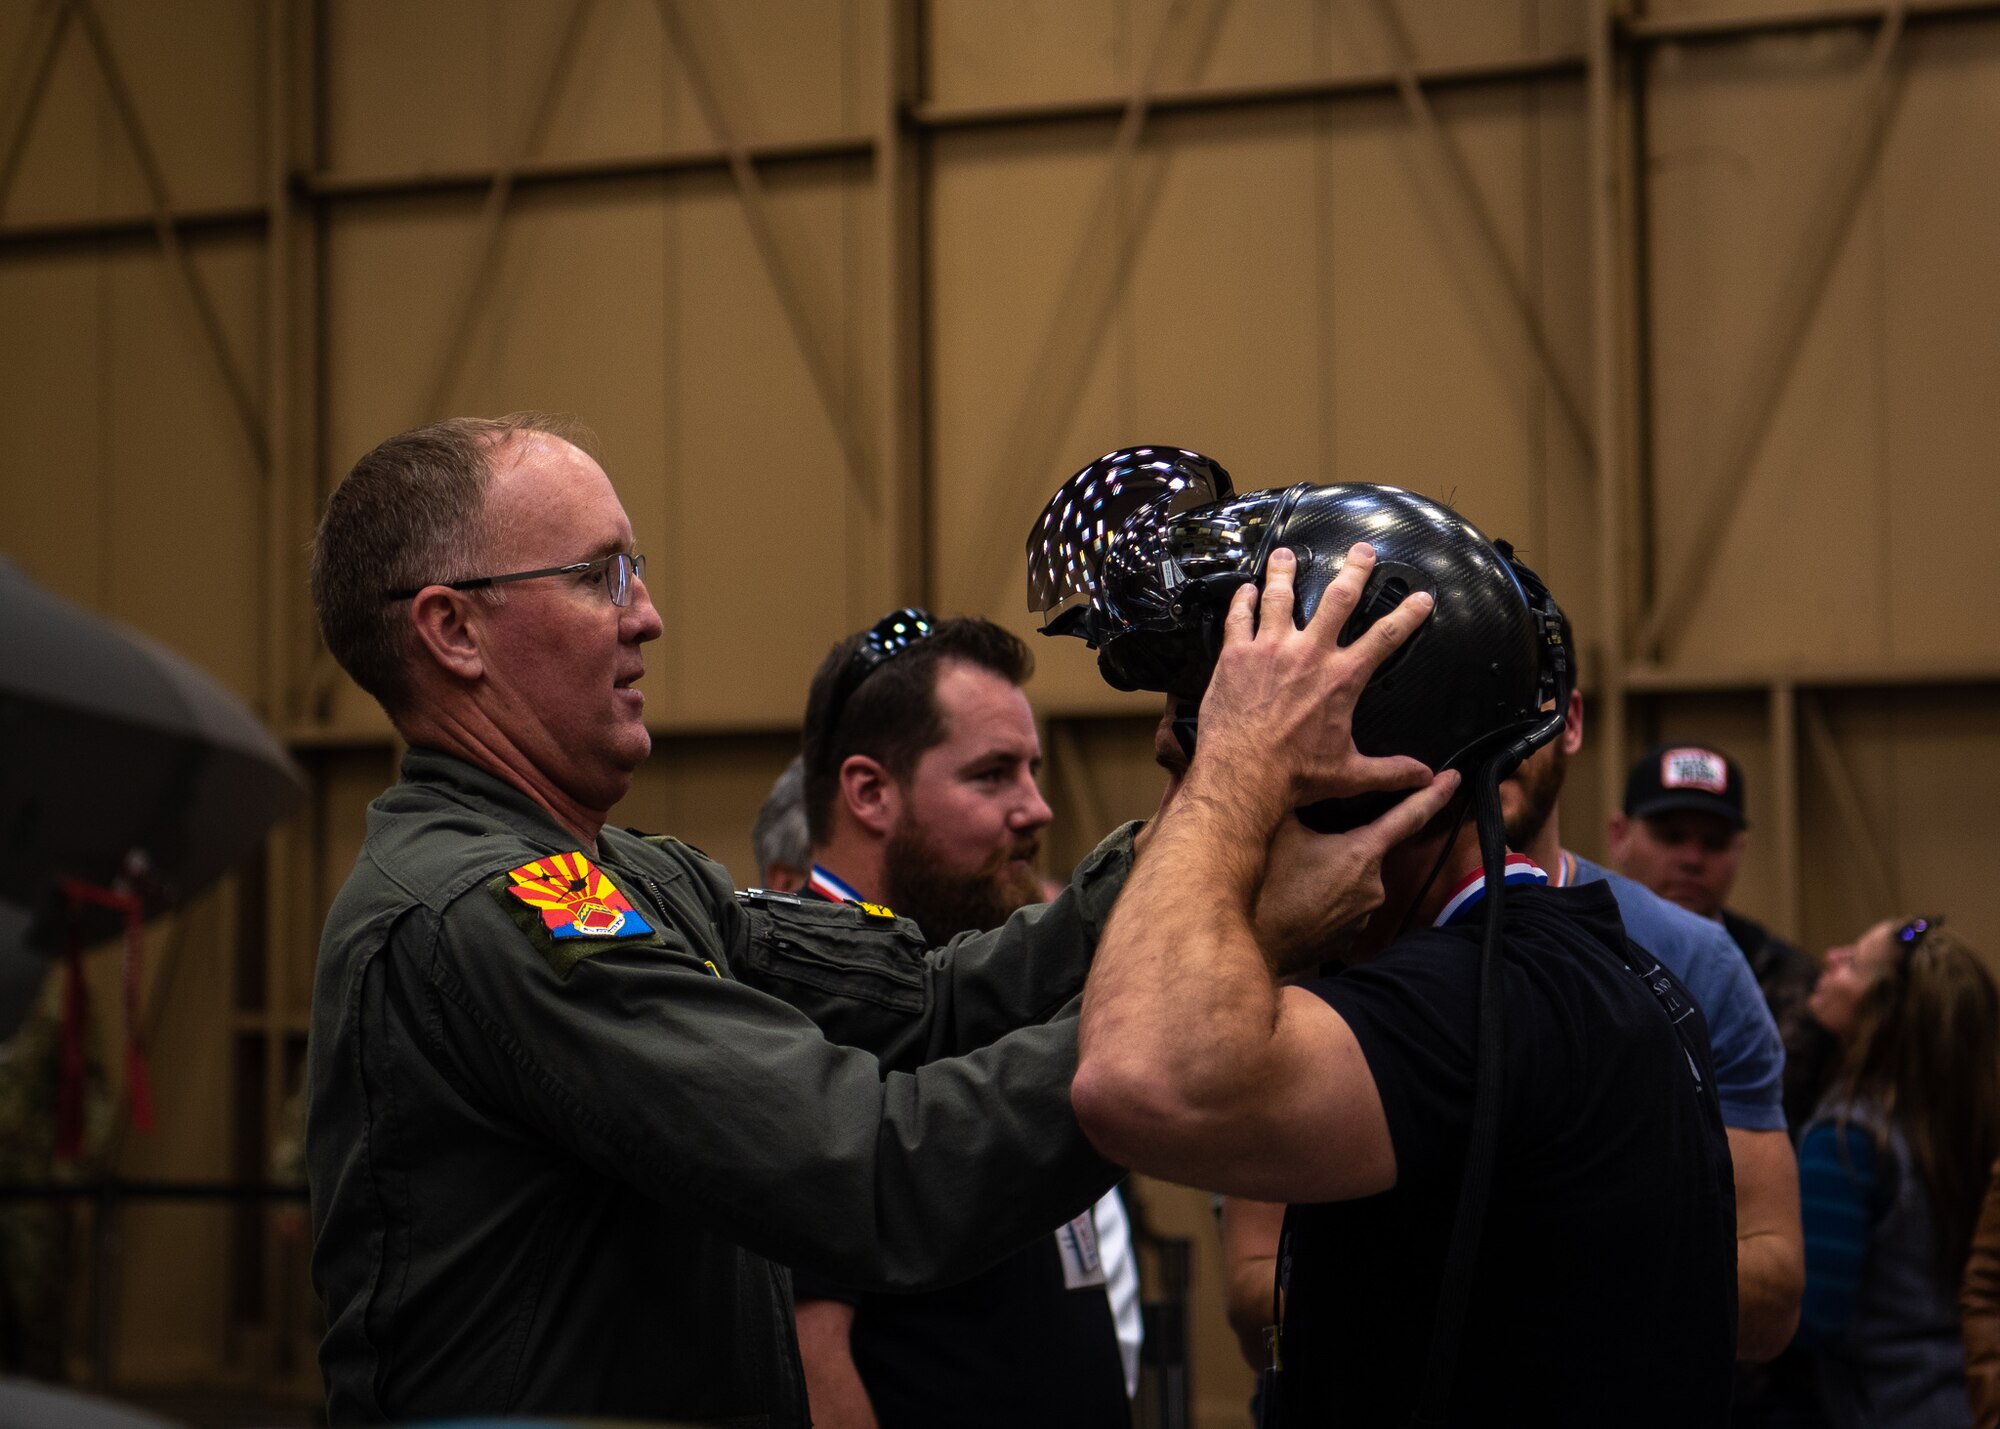 Brig. Gen. Todd Canterbury, 56th Fighter Wing commander, places his F-35A Lightning II helmet on an Airpower Foundation member during a base tour, March 8, 2019 at Luke Air Force Base, Ariz.